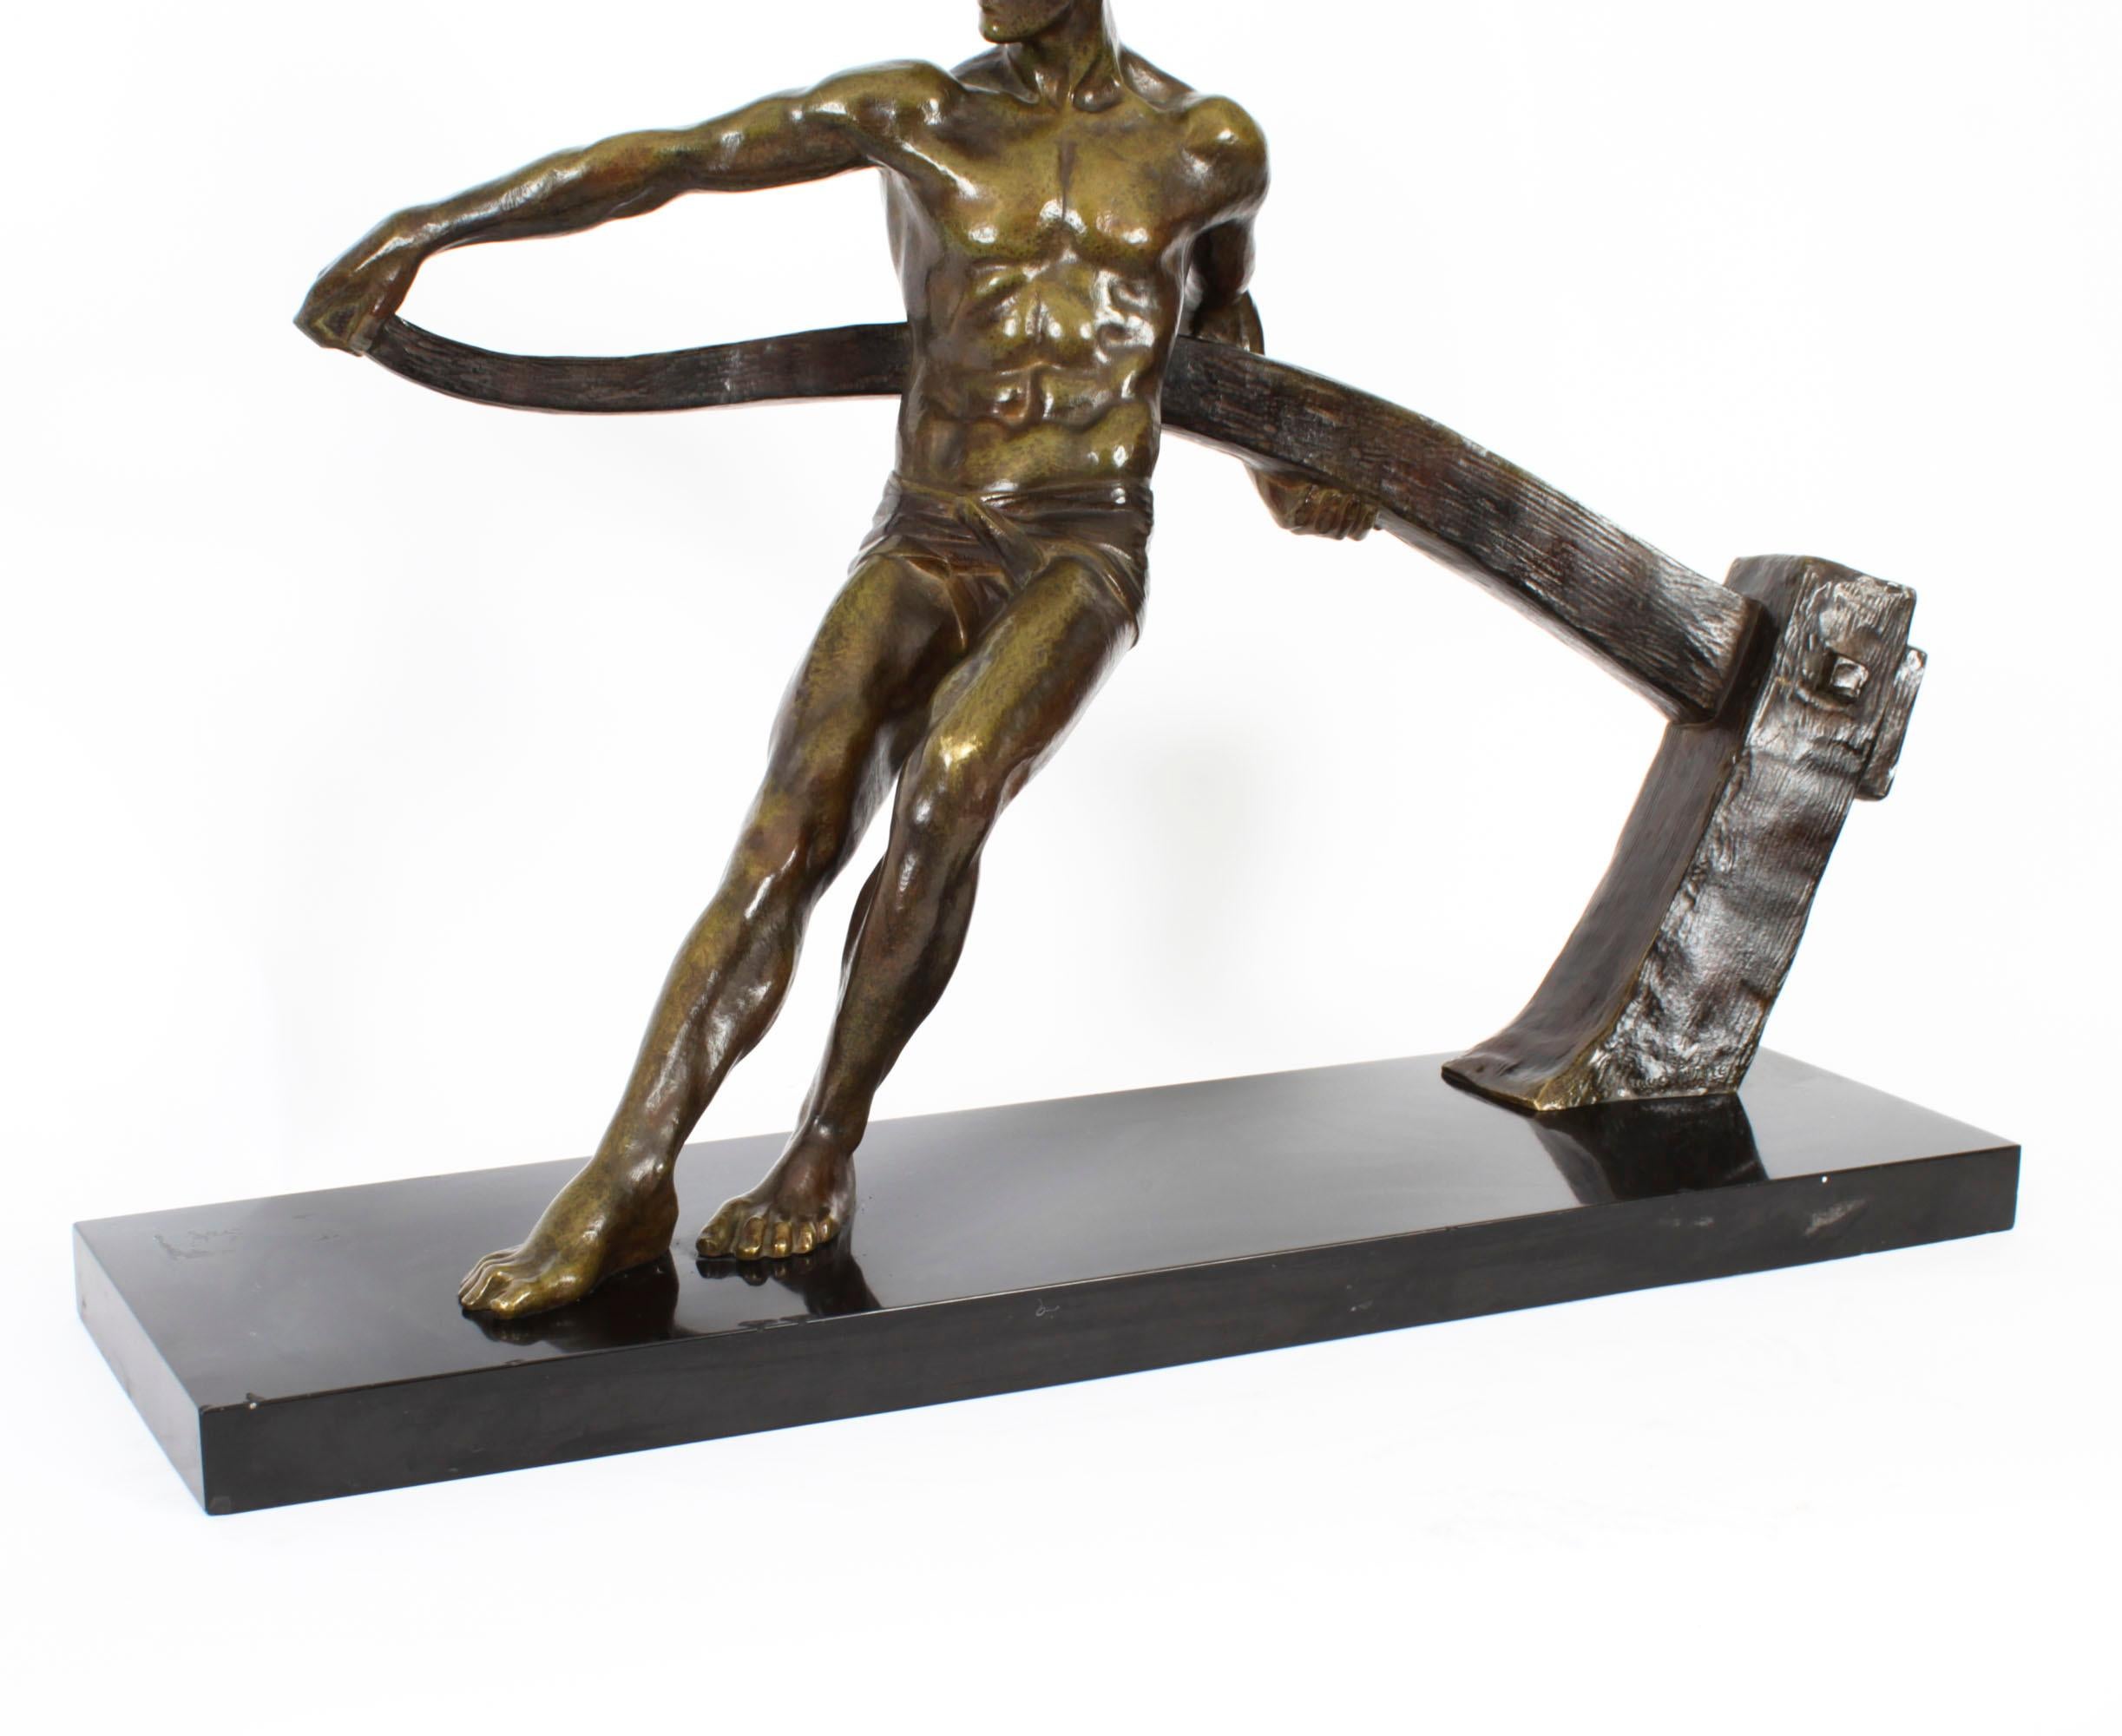 French Antique Art Deco Bronze Figure of a Riverman by Maurice Guiraud-Rivière 1920s For Sale